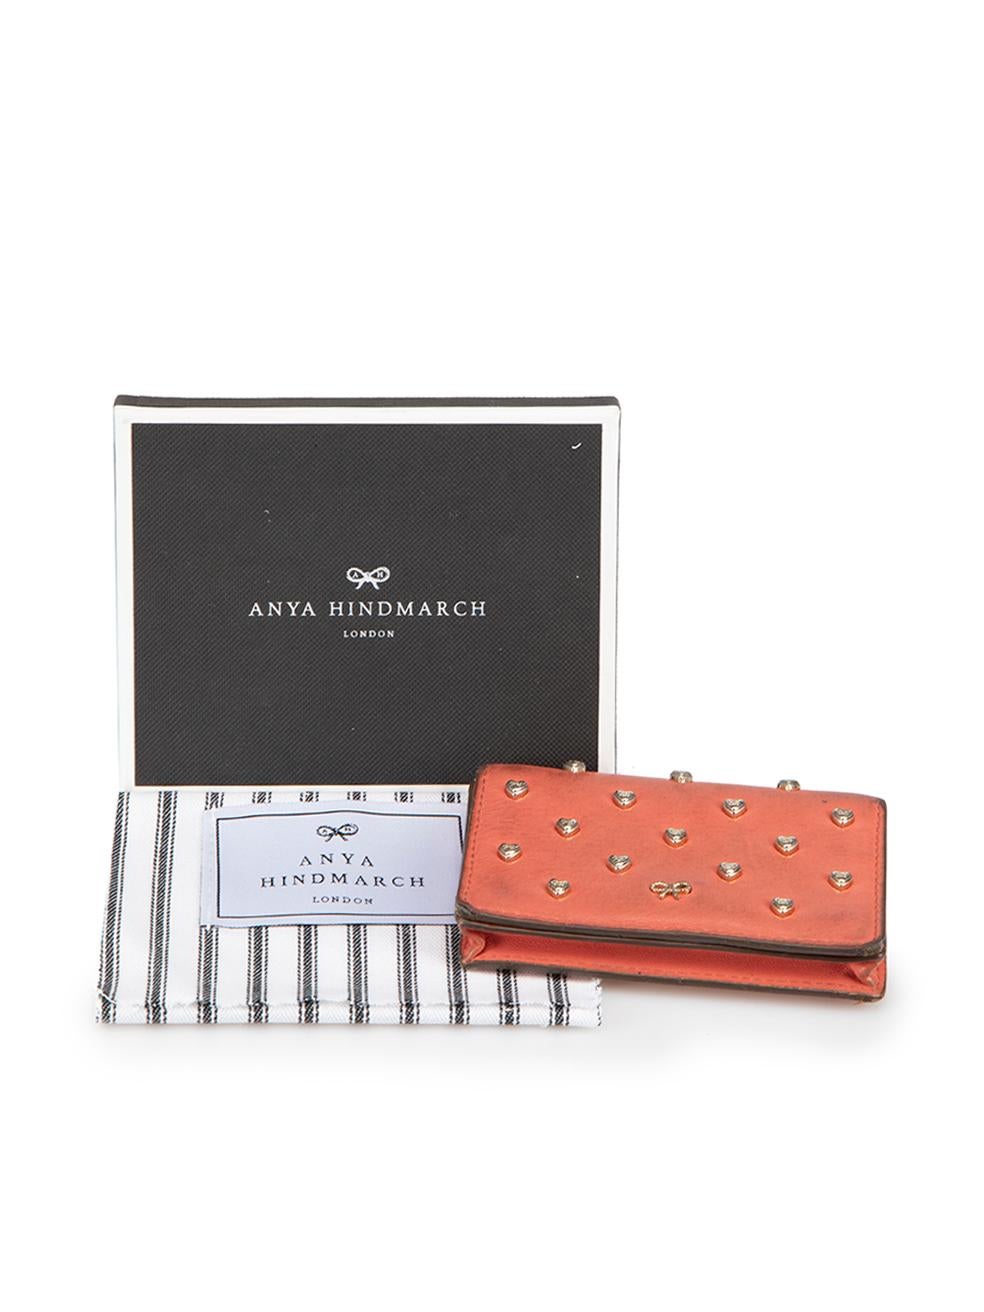 Anya Hindmarch Women's Coral Leather Joss Heart Studded Card Case For Sale 4